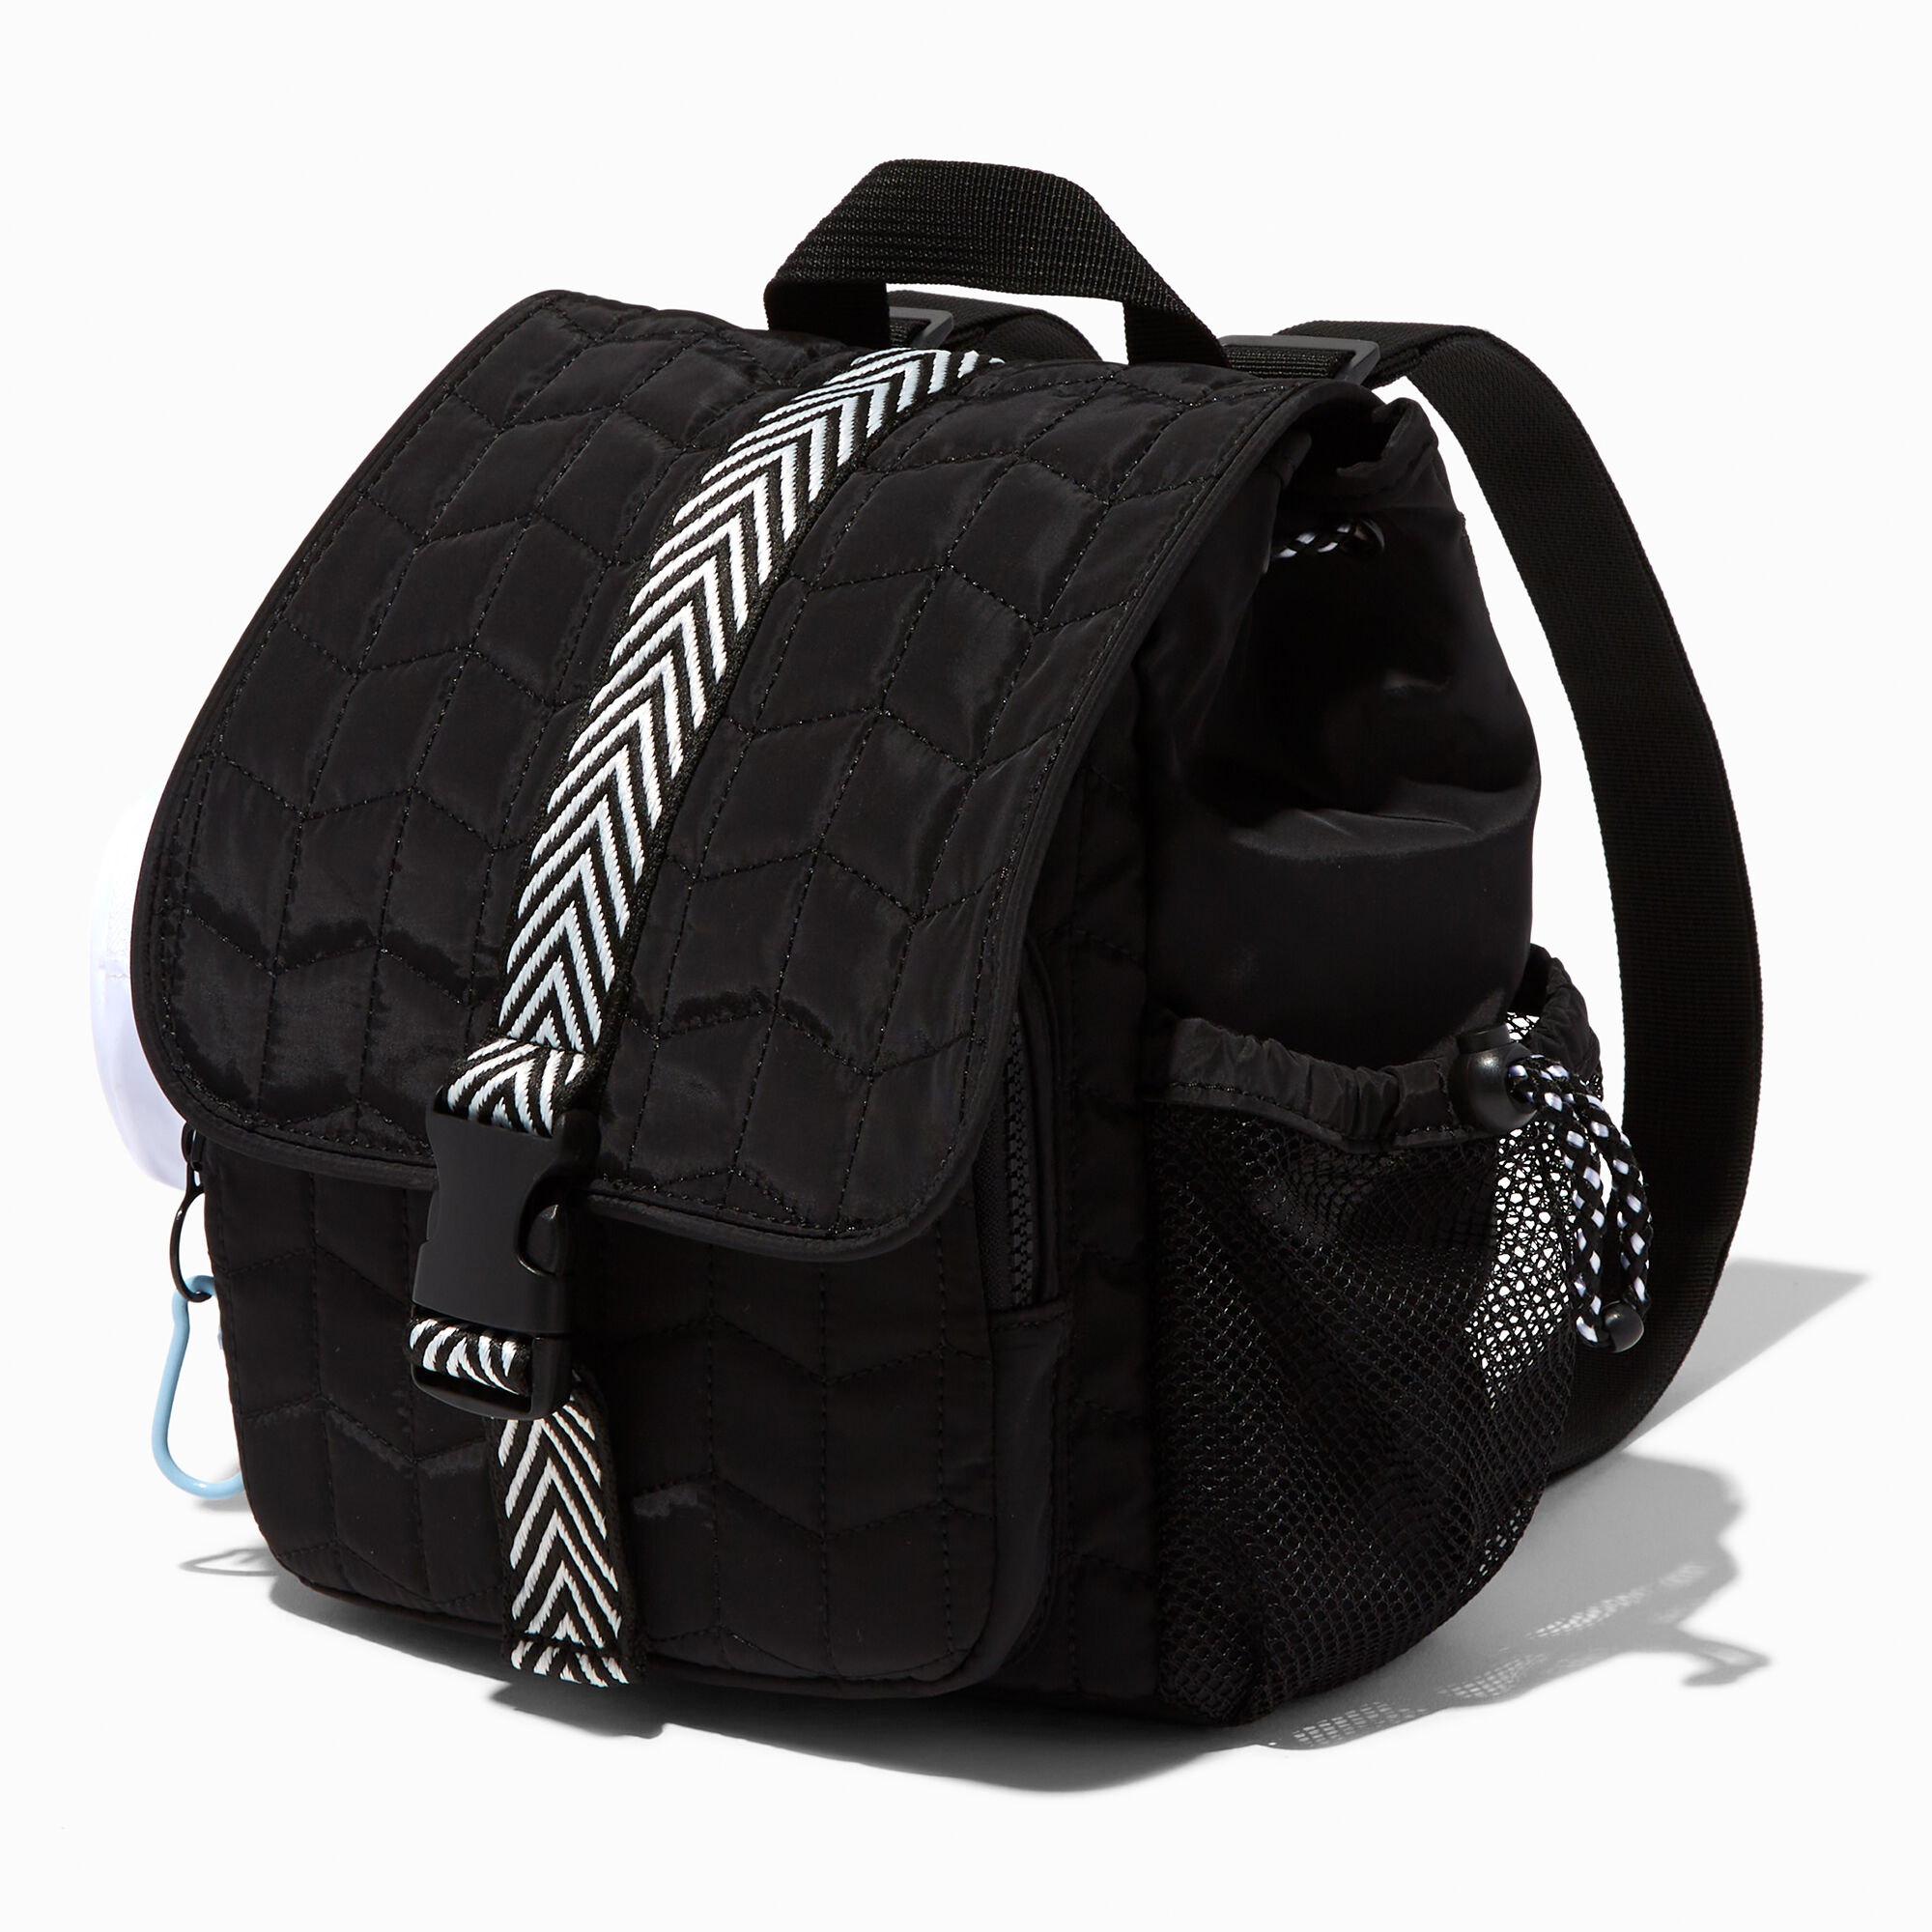 View Claires Sporty Chevron Mini Flap Backpack Black information